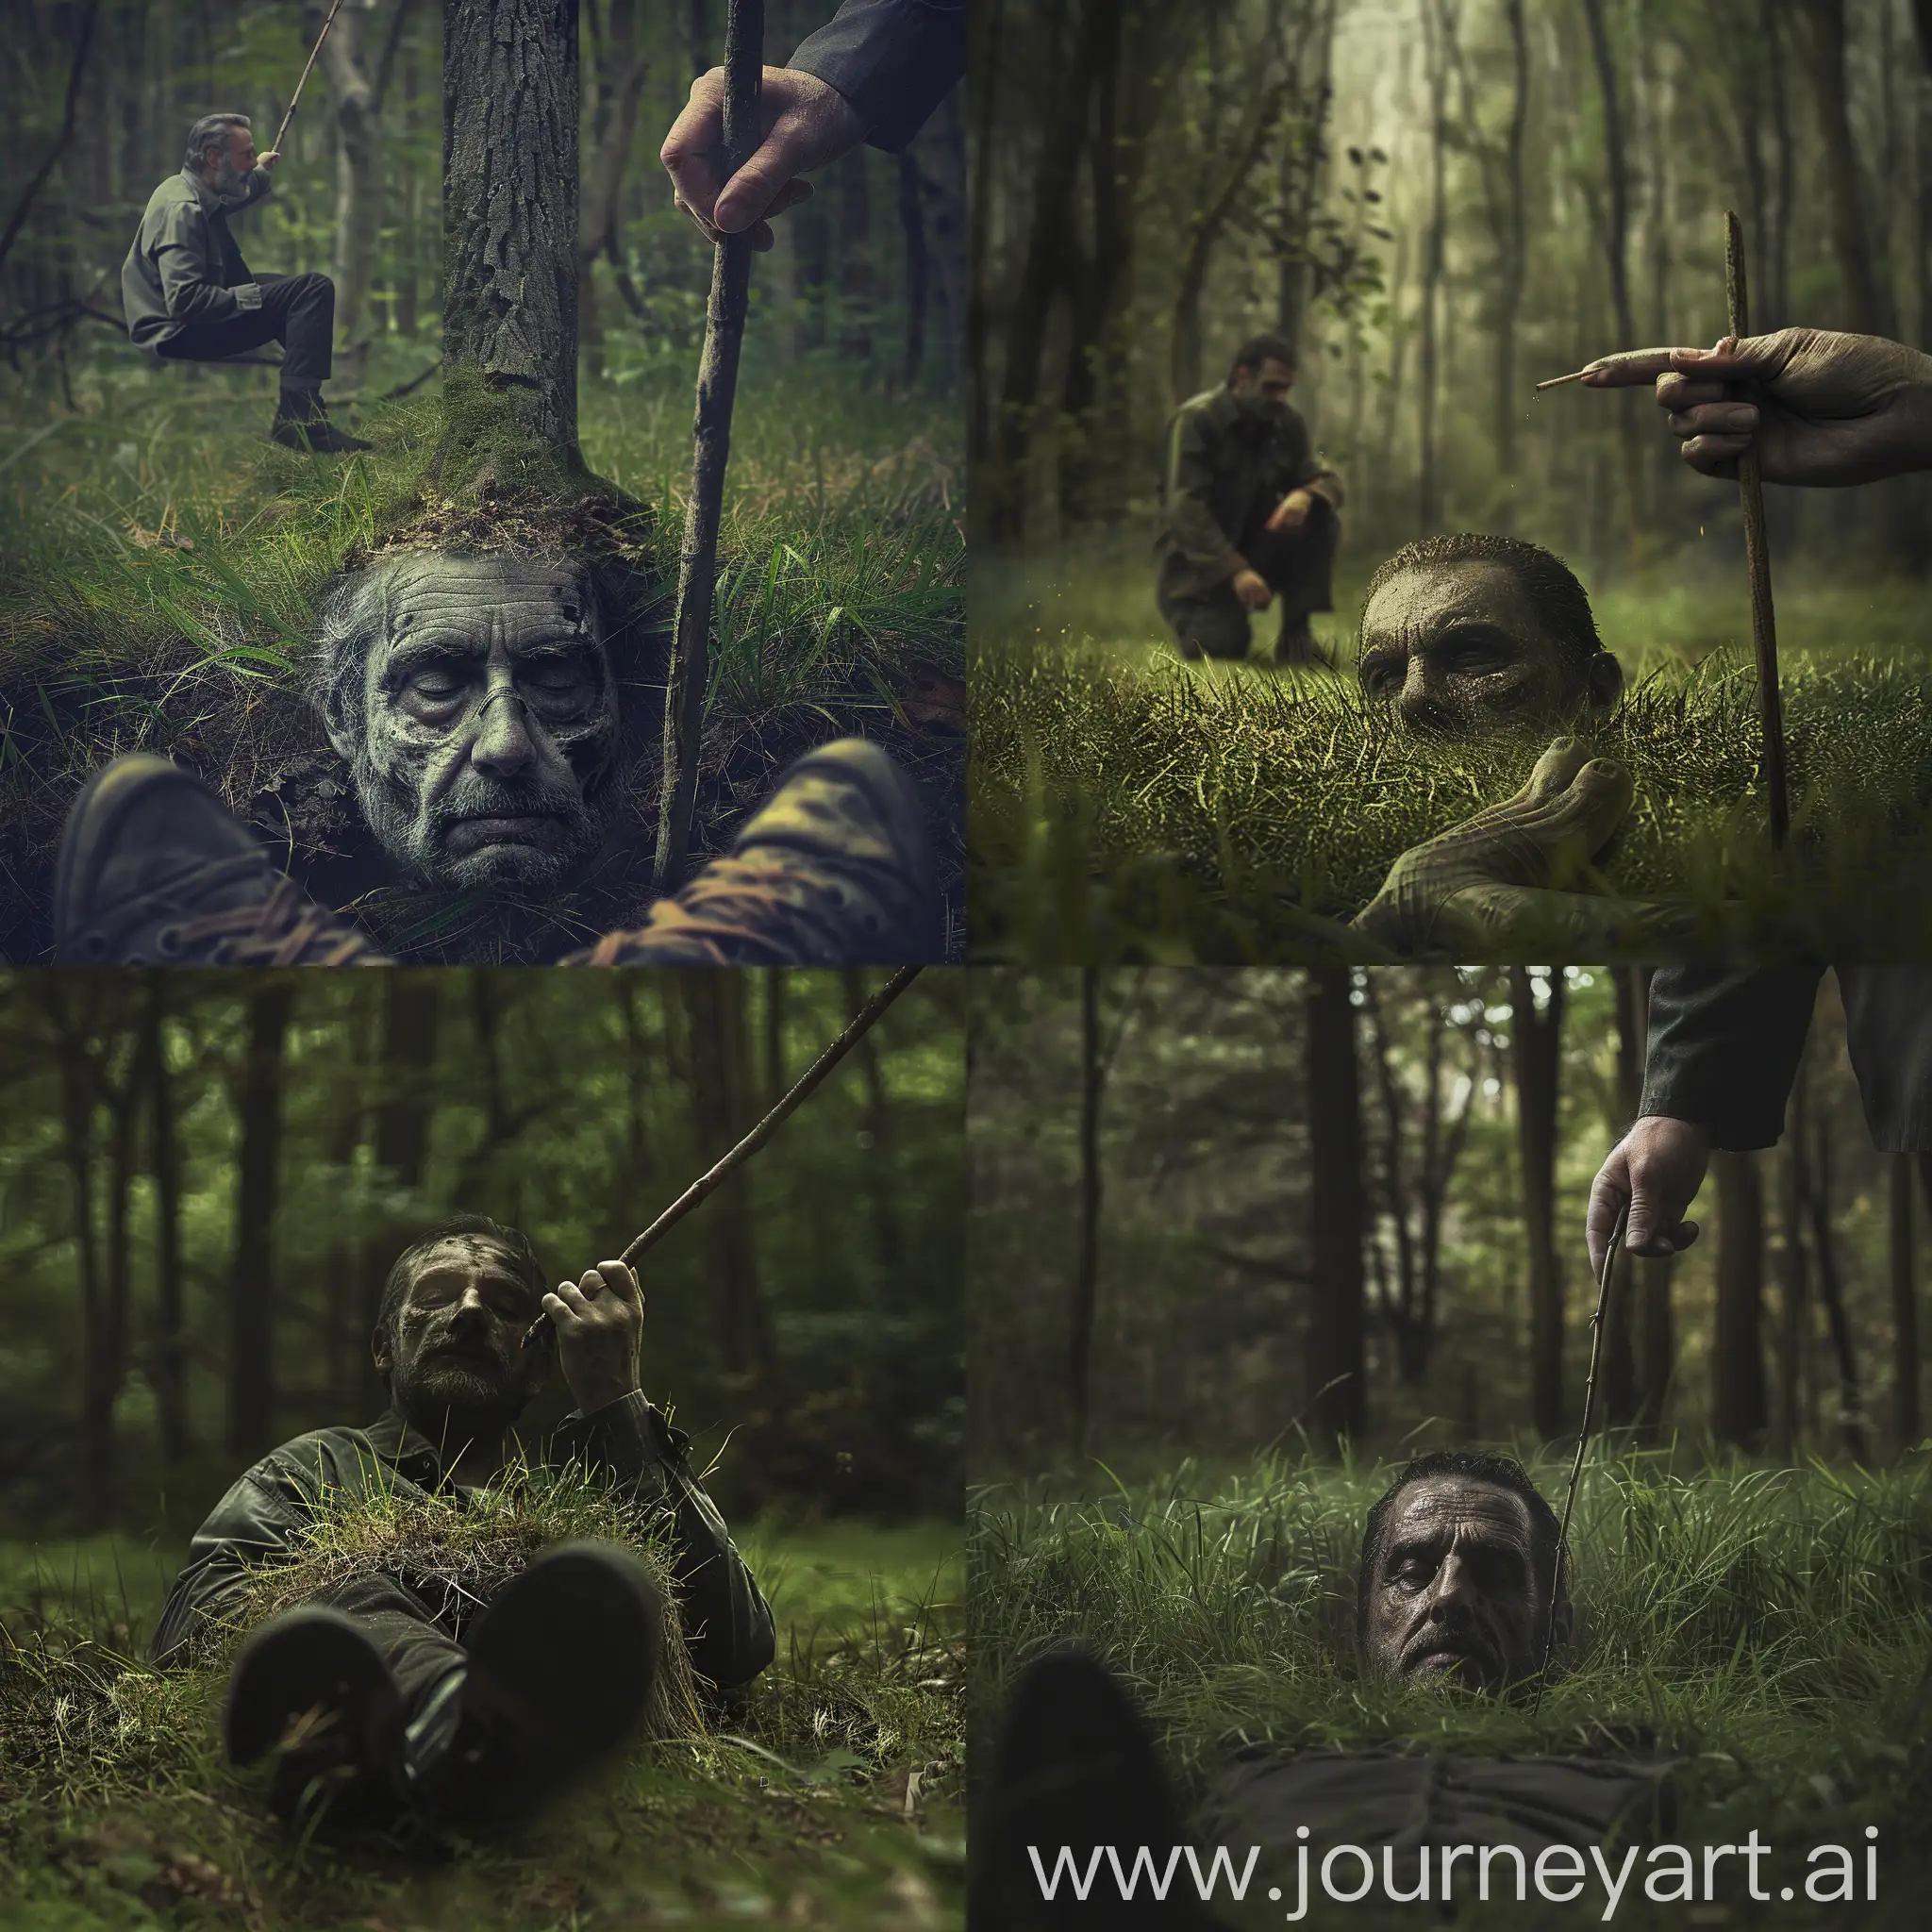 Mysterious-Forest-Encounter-NeganLike-Figure-Pointing-in-Woods